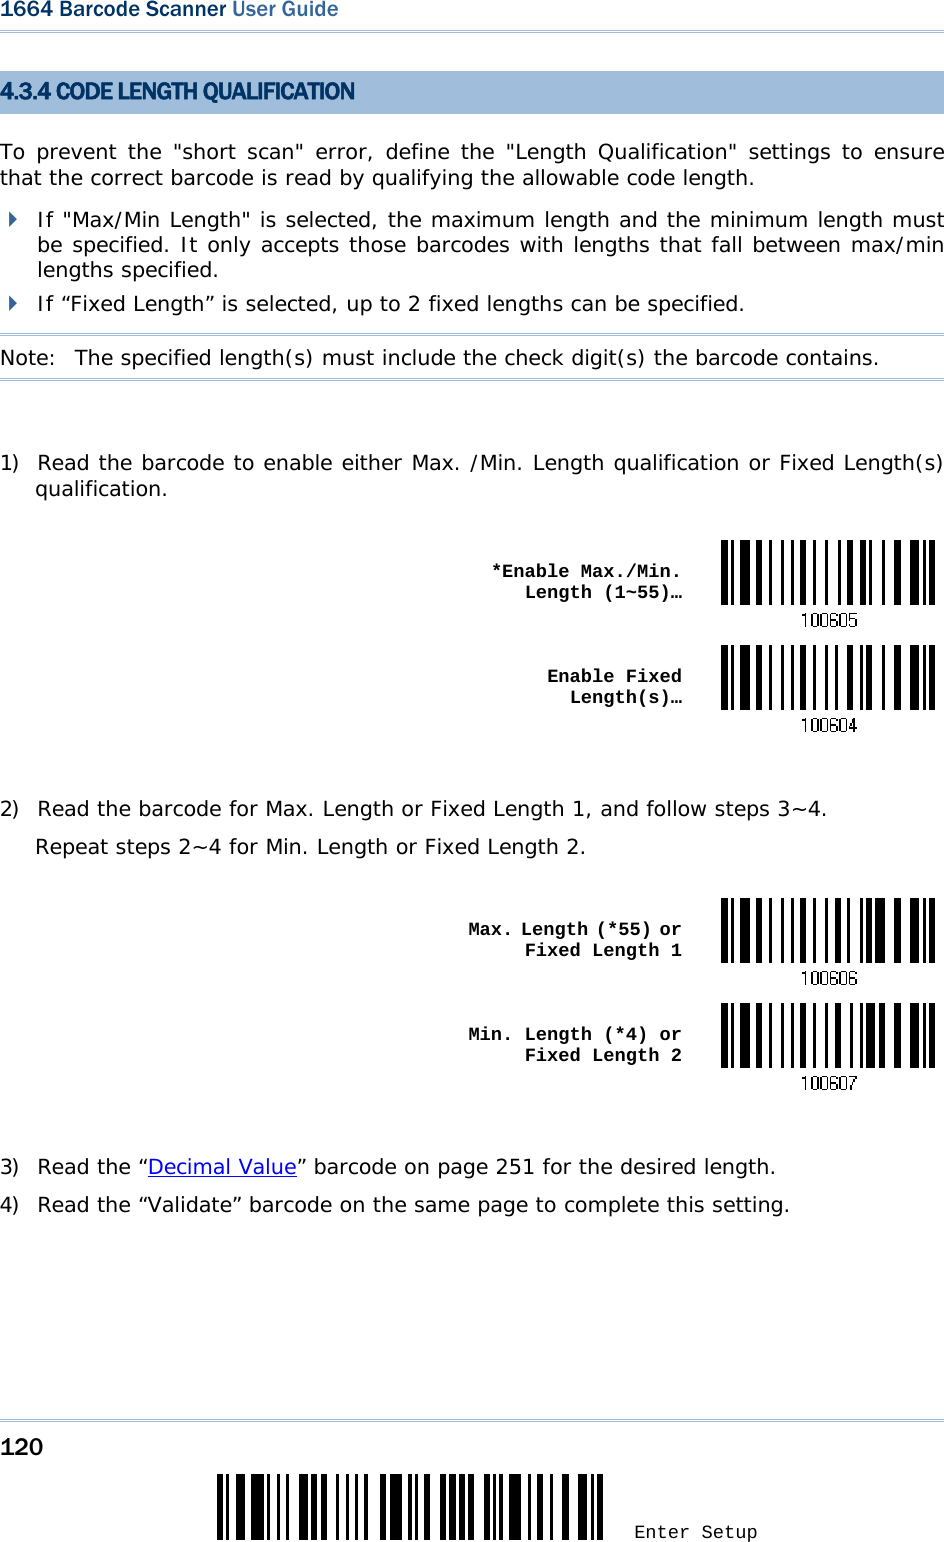 120 Enter Setup 1664 Barcode Scanner User Guide  4.3.4 CODE LENGTH QUALIFICATION To prevent the &quot;short scan&quot; error, define the &quot;Length Qualification&quot; settings to ensure that the correct barcode is read by qualifying the allowable code length.  If &quot;Max/Min Length&quot; is selected, the maximum length and the minimum length must be specified. It only accepts those barcodes with lengths that fall between max/min lengths specified.  If “Fixed Length” is selected, up to 2 fixed lengths can be specified. Note:   The specified length(s) must include the check digit(s) the barcode contains.  1) Read the barcode to enable either Max. /Min. Length qualification or Fixed Length(s) qualification.   *Enable Max./Min. Length (1~55)… Enable Fixed Length(s)… 2) Read the barcode for Max. Length or Fixed Length 1, and follow steps 3~4. Repeat steps 2~4 for Min. Length or Fixed Length 2.   Max. Length (*55) or Fixed Length 1 Min. Length (*4) or Fixed Length 2 3) Read the “Decimal Value” barcode on page 251 for the desired length.  4) Read the “Validate” barcode on the same page to complete this setting.      